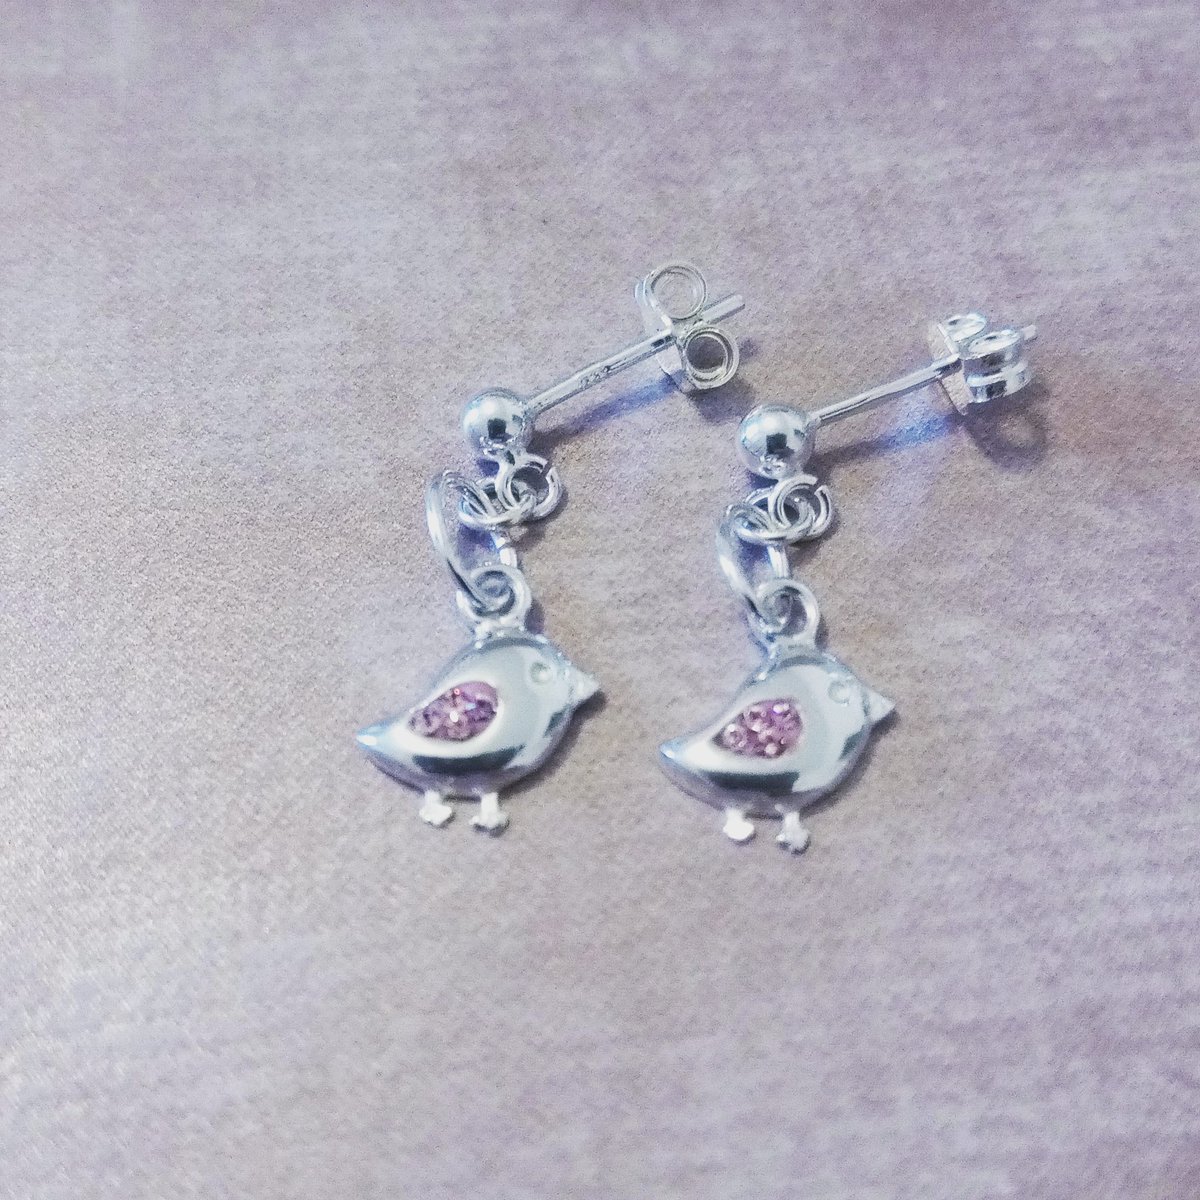 These cute little bird earrings will be being listed in my shop very soon.

#sterlingsilverjewelry #Handmadejewellery #handmadegifts #handmade #Handmadeearrings #KnotsandTreasures #folksyfinds #folksyseller #folksyuk #folksy #folksyshop #newonfolksy